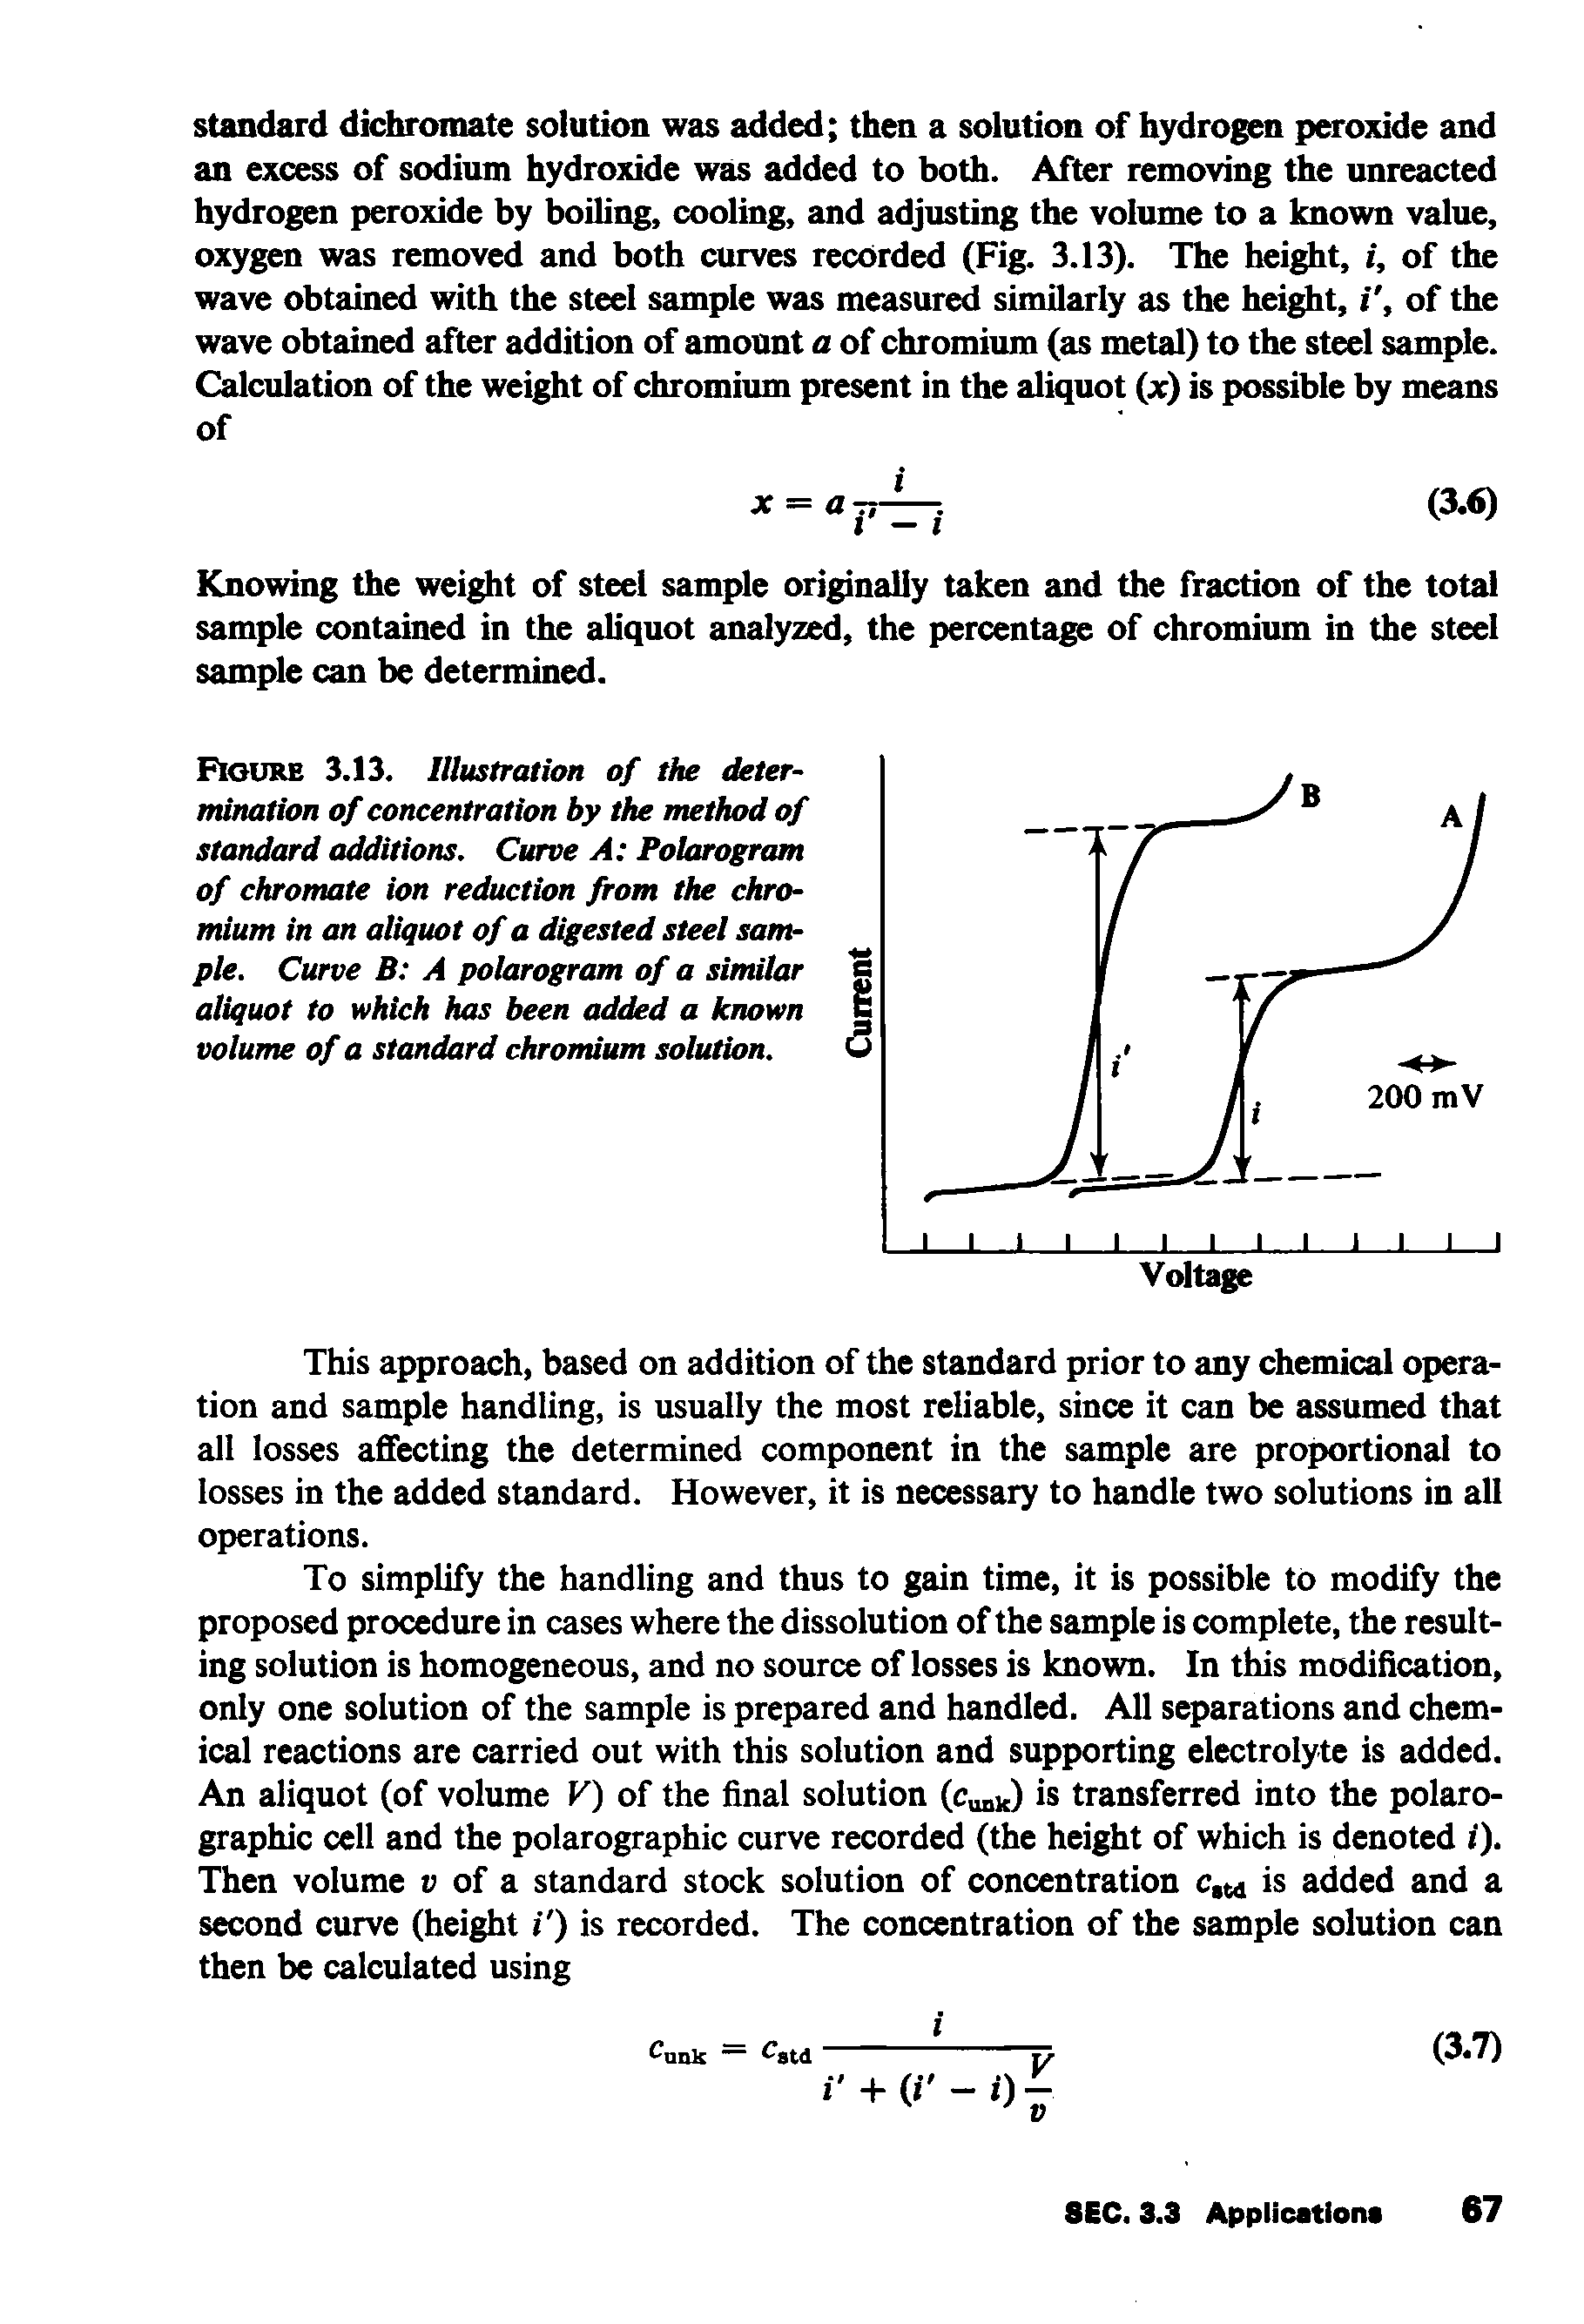 Figure 3.13. Illustration of the determination of concentration by the method of standard additions. Curve A Polarogram of chromate ion reduction from the chromium in an aliquot of a digested steel sanv-pie. Curve B A polarogram of a similar aliquot to which has been added a known volume of a standard chromium solution.